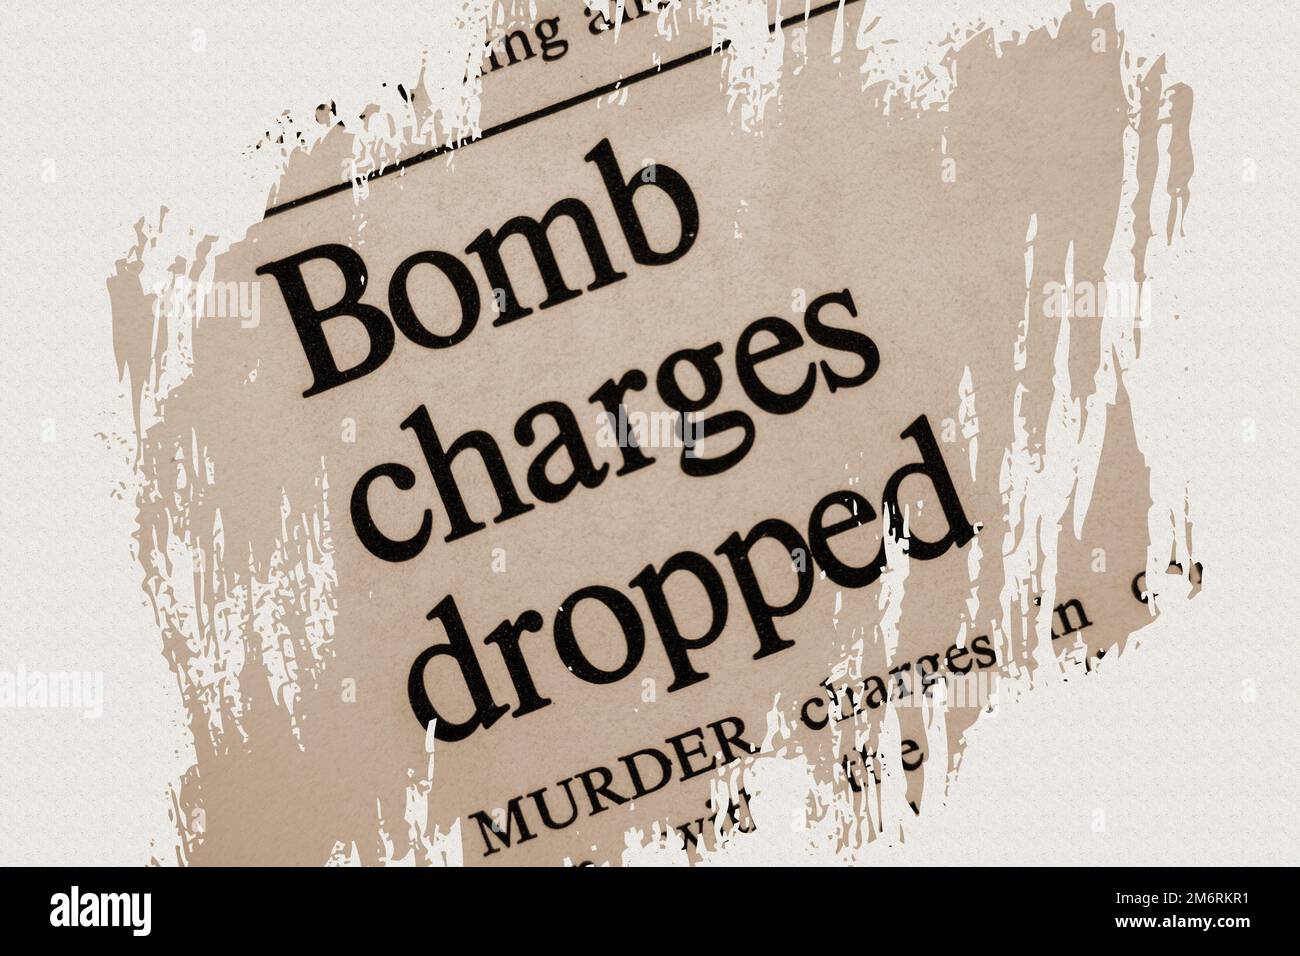 Bomb charges dropped - news story from 1975 newspaper headline article title with overlay in sepia Stock Photo